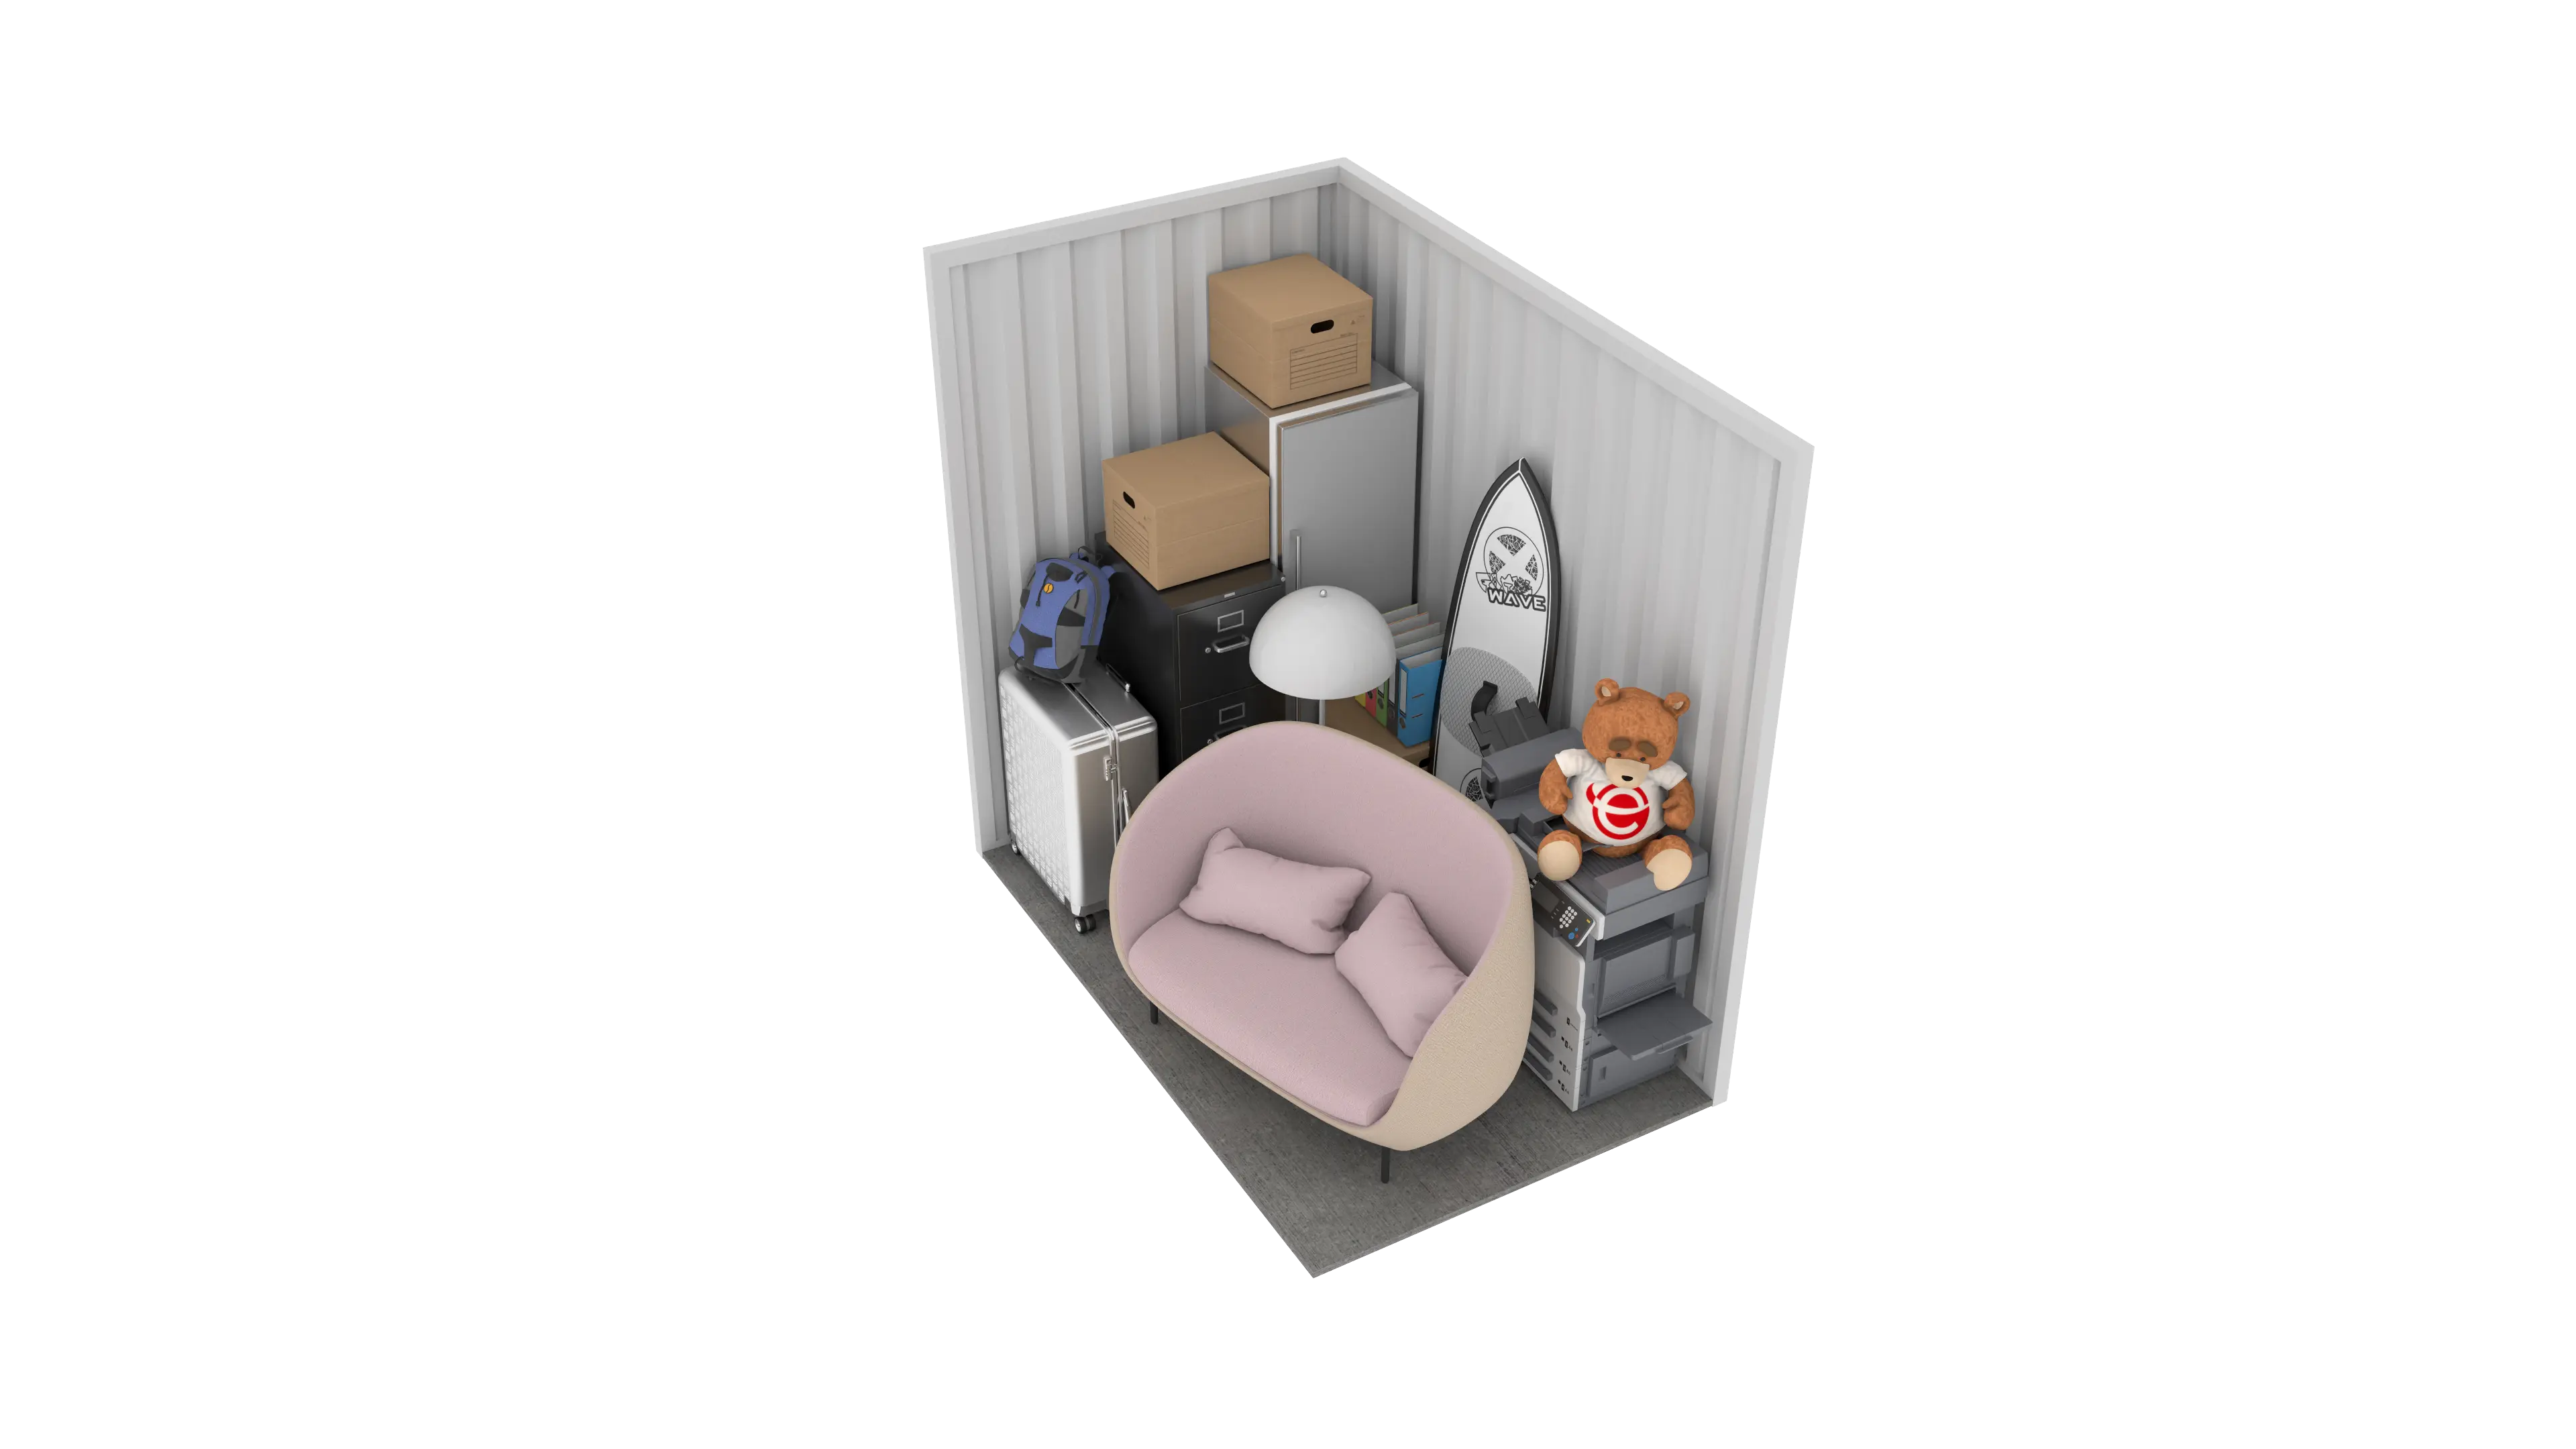 Isometric still of a storage unit with a size of 48 sqft